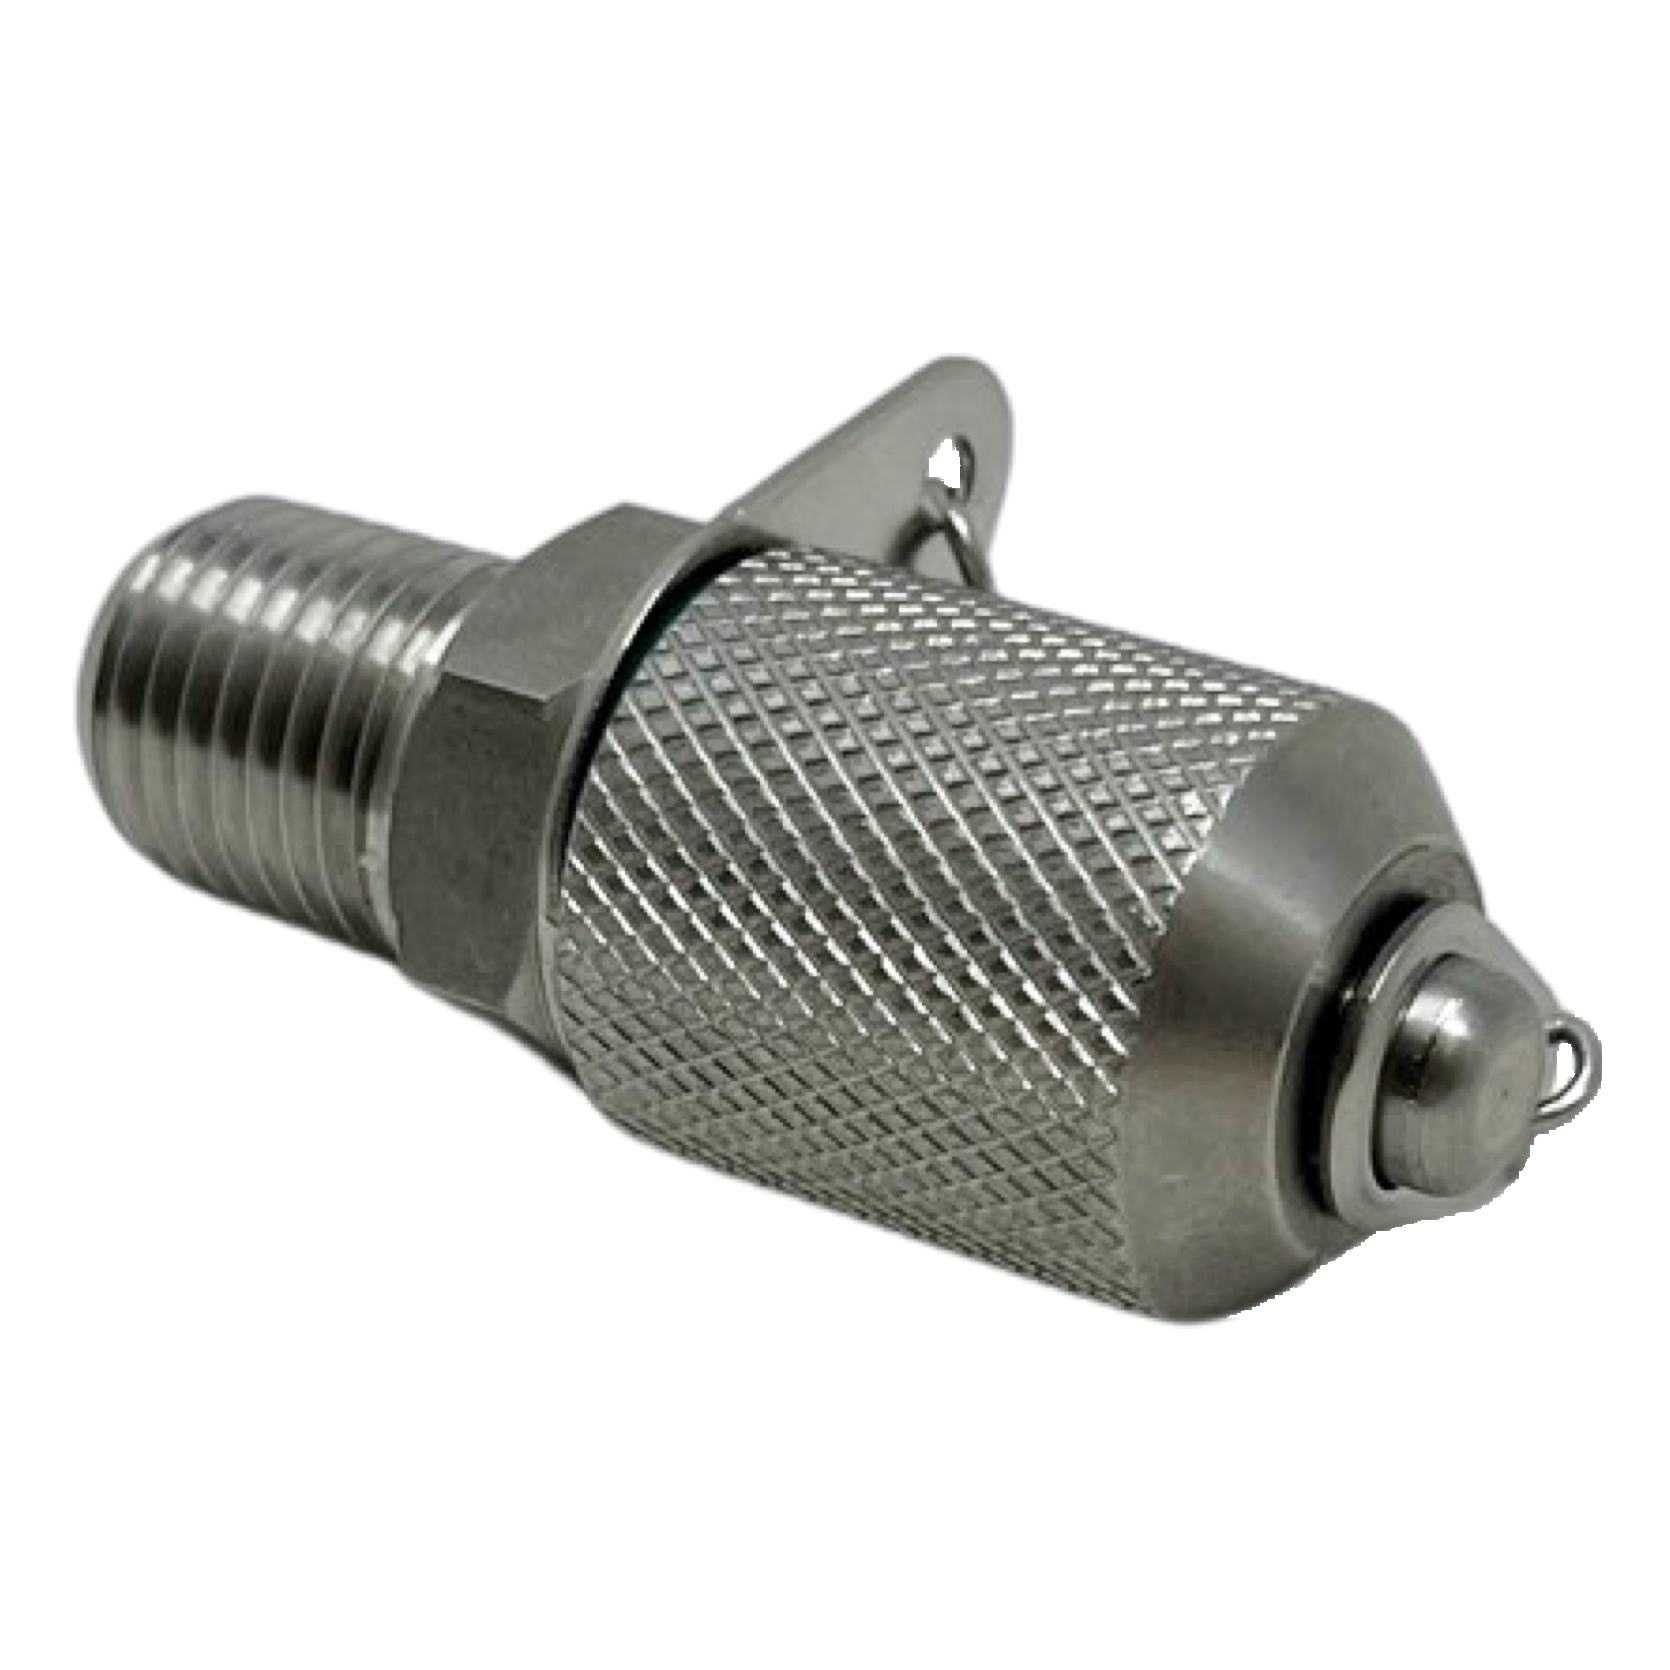 TPPM1620CBN1/8 : Anchor Test Point, 9000psi Rated, 1/8" NPT, Buna Seals, Zinc/Nickel Plated Carbon Steel